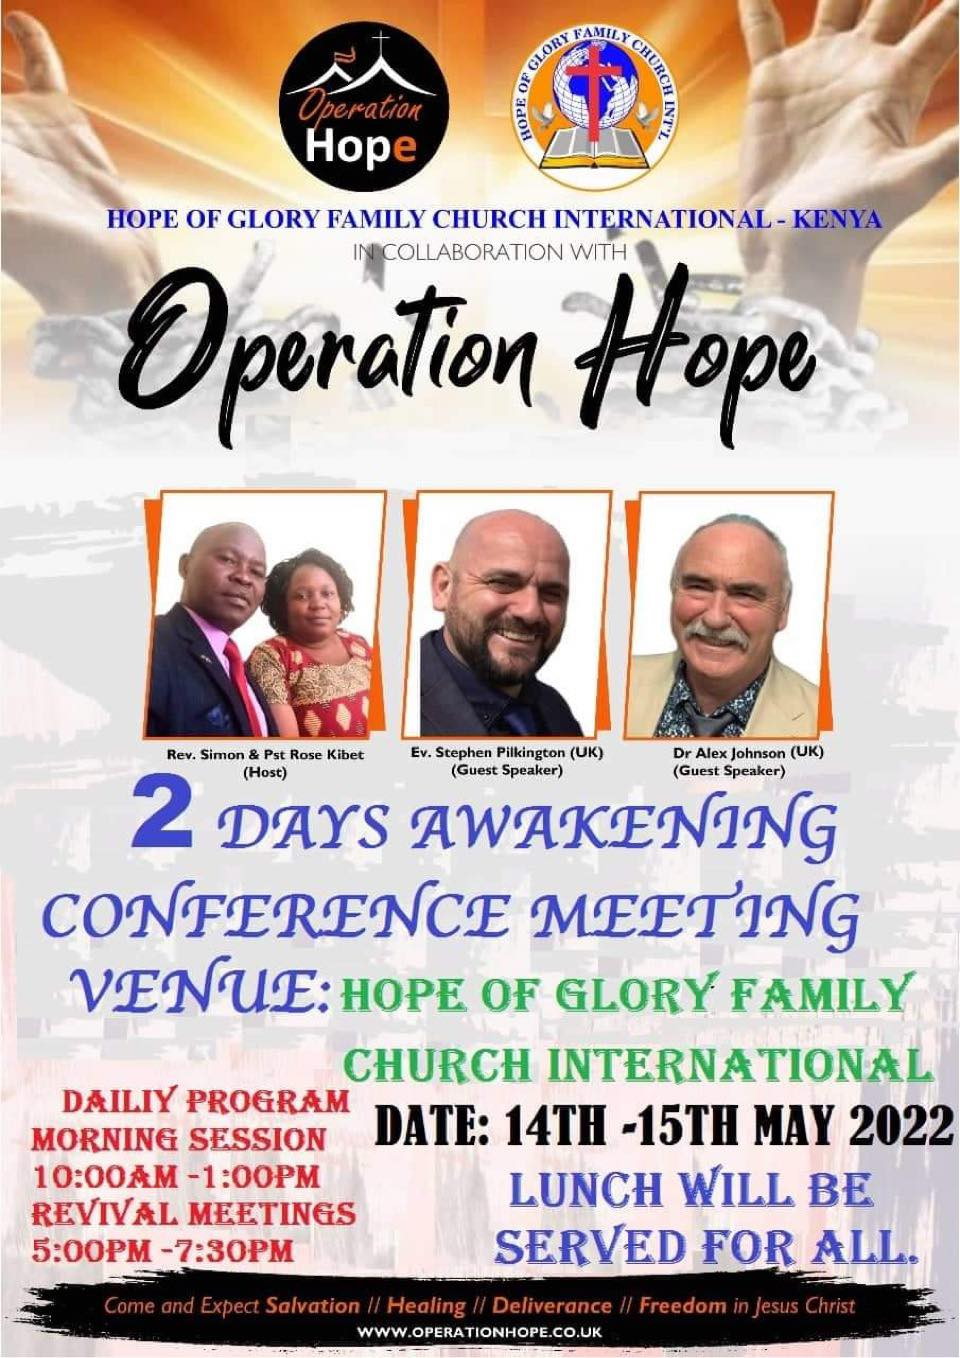 awakening conference meeting 14th - 15th may 2022